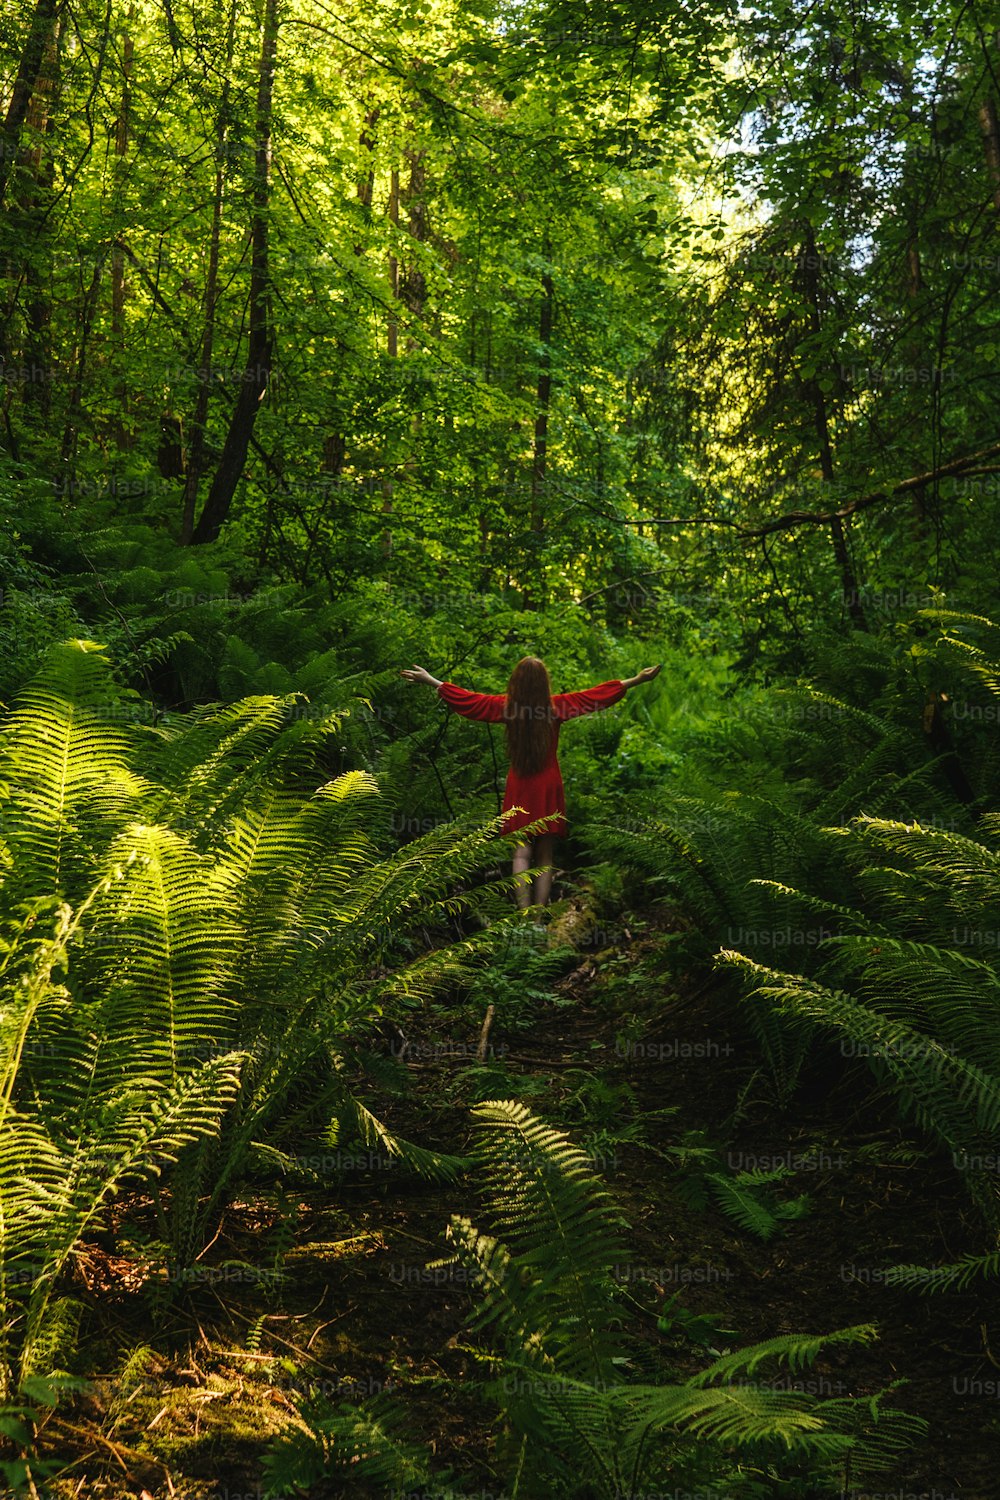 The young woman in red dress back view in forest with fern. Concept of nature and happy life, adventure. Beautiful light.